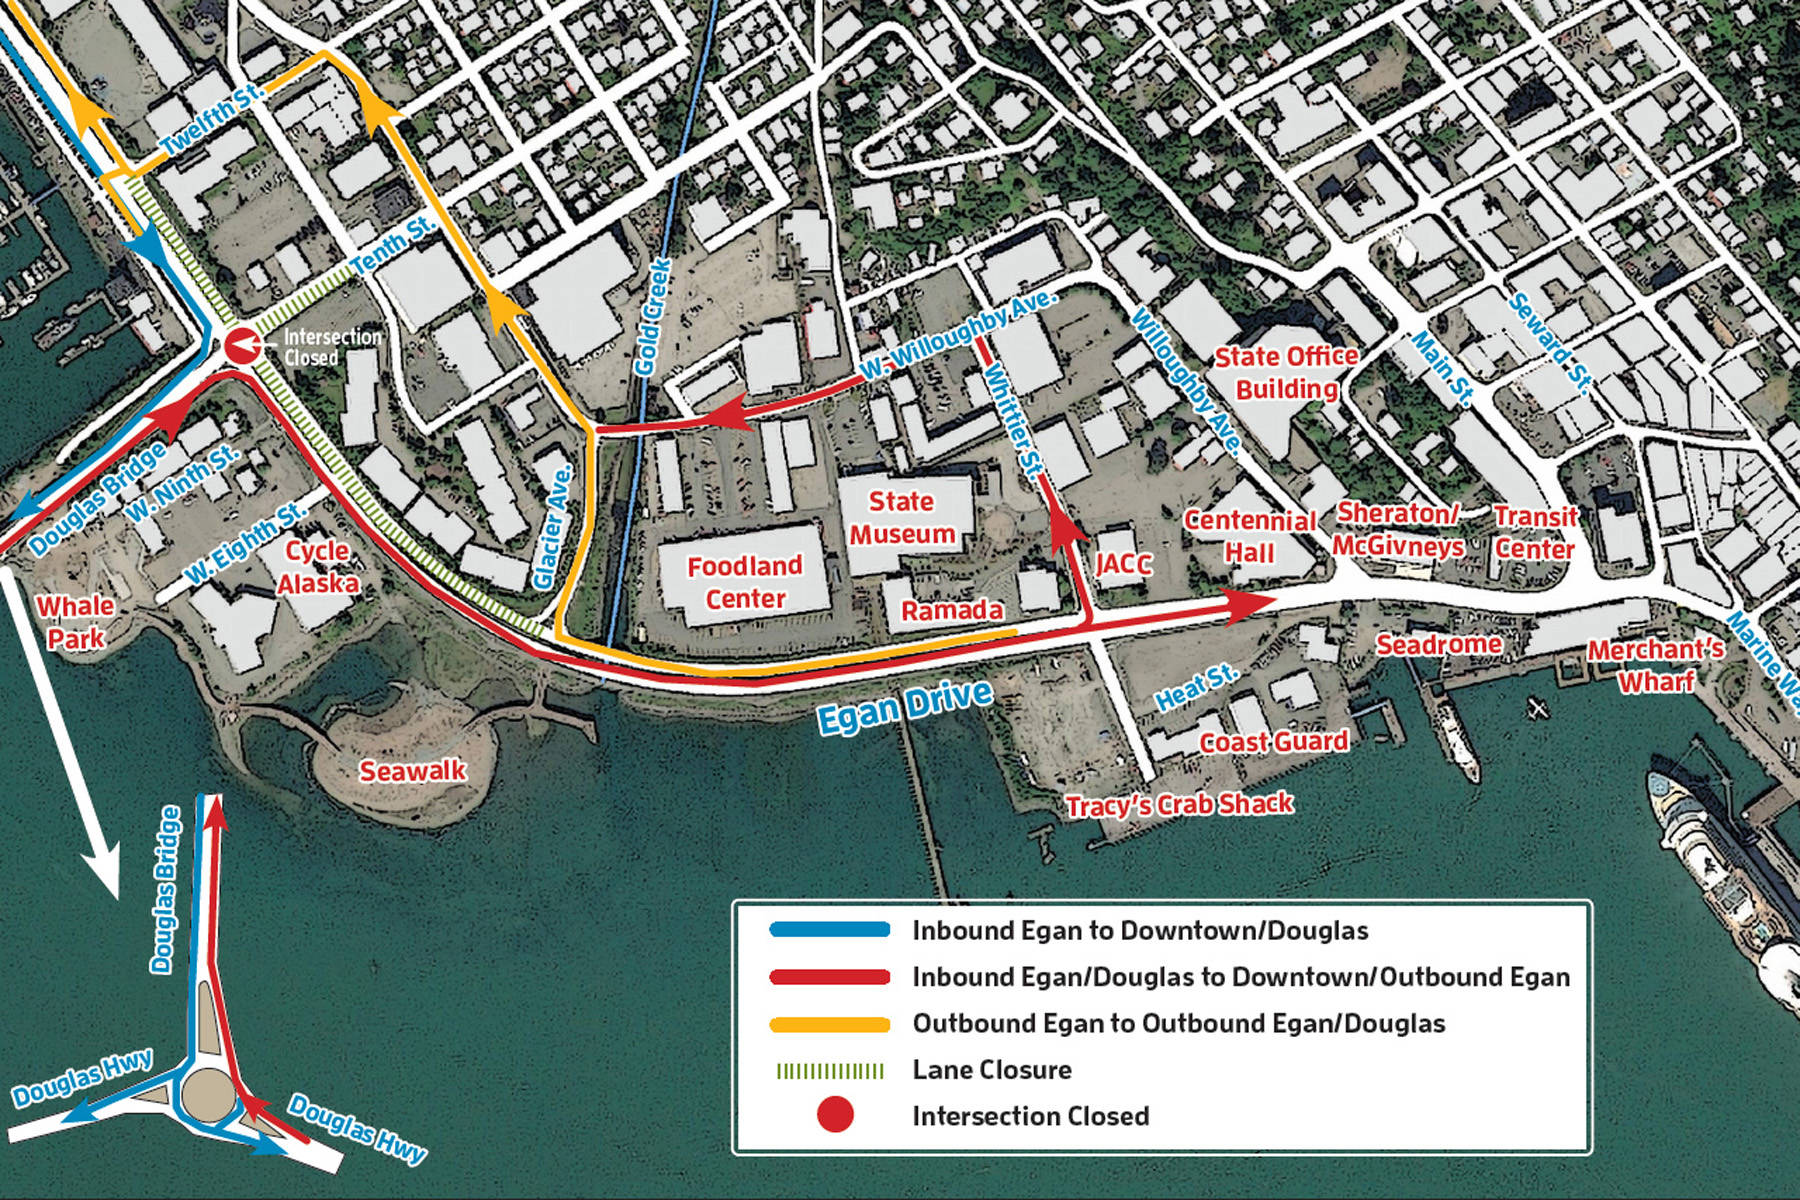 Construction on the intersection of Tenth Street and Egan Drive beginning the morning of Friday, May 8, 2020. (Courtesy art | Alaska Department of Transportation)